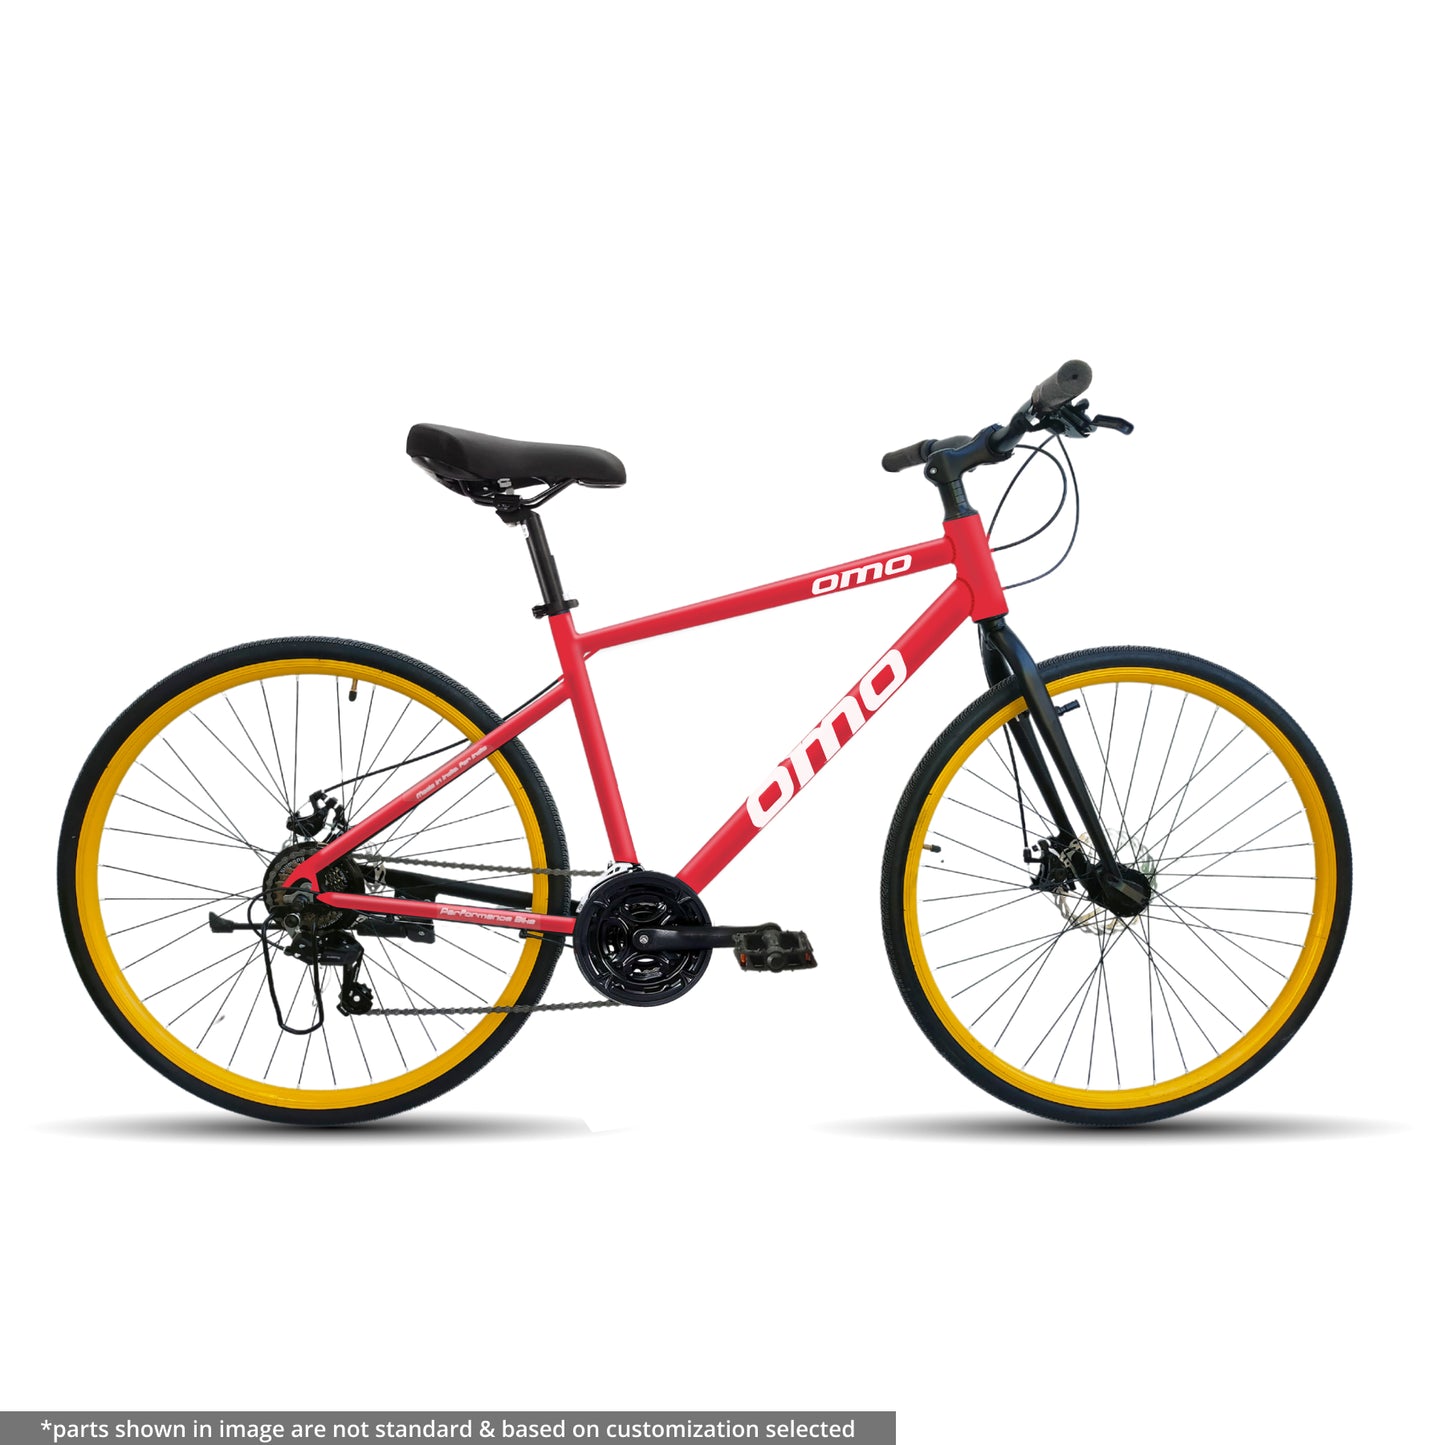 Hampi ACE 24S alloy frame hybrid bike under 15000 in india online by omobikes RED yellow color